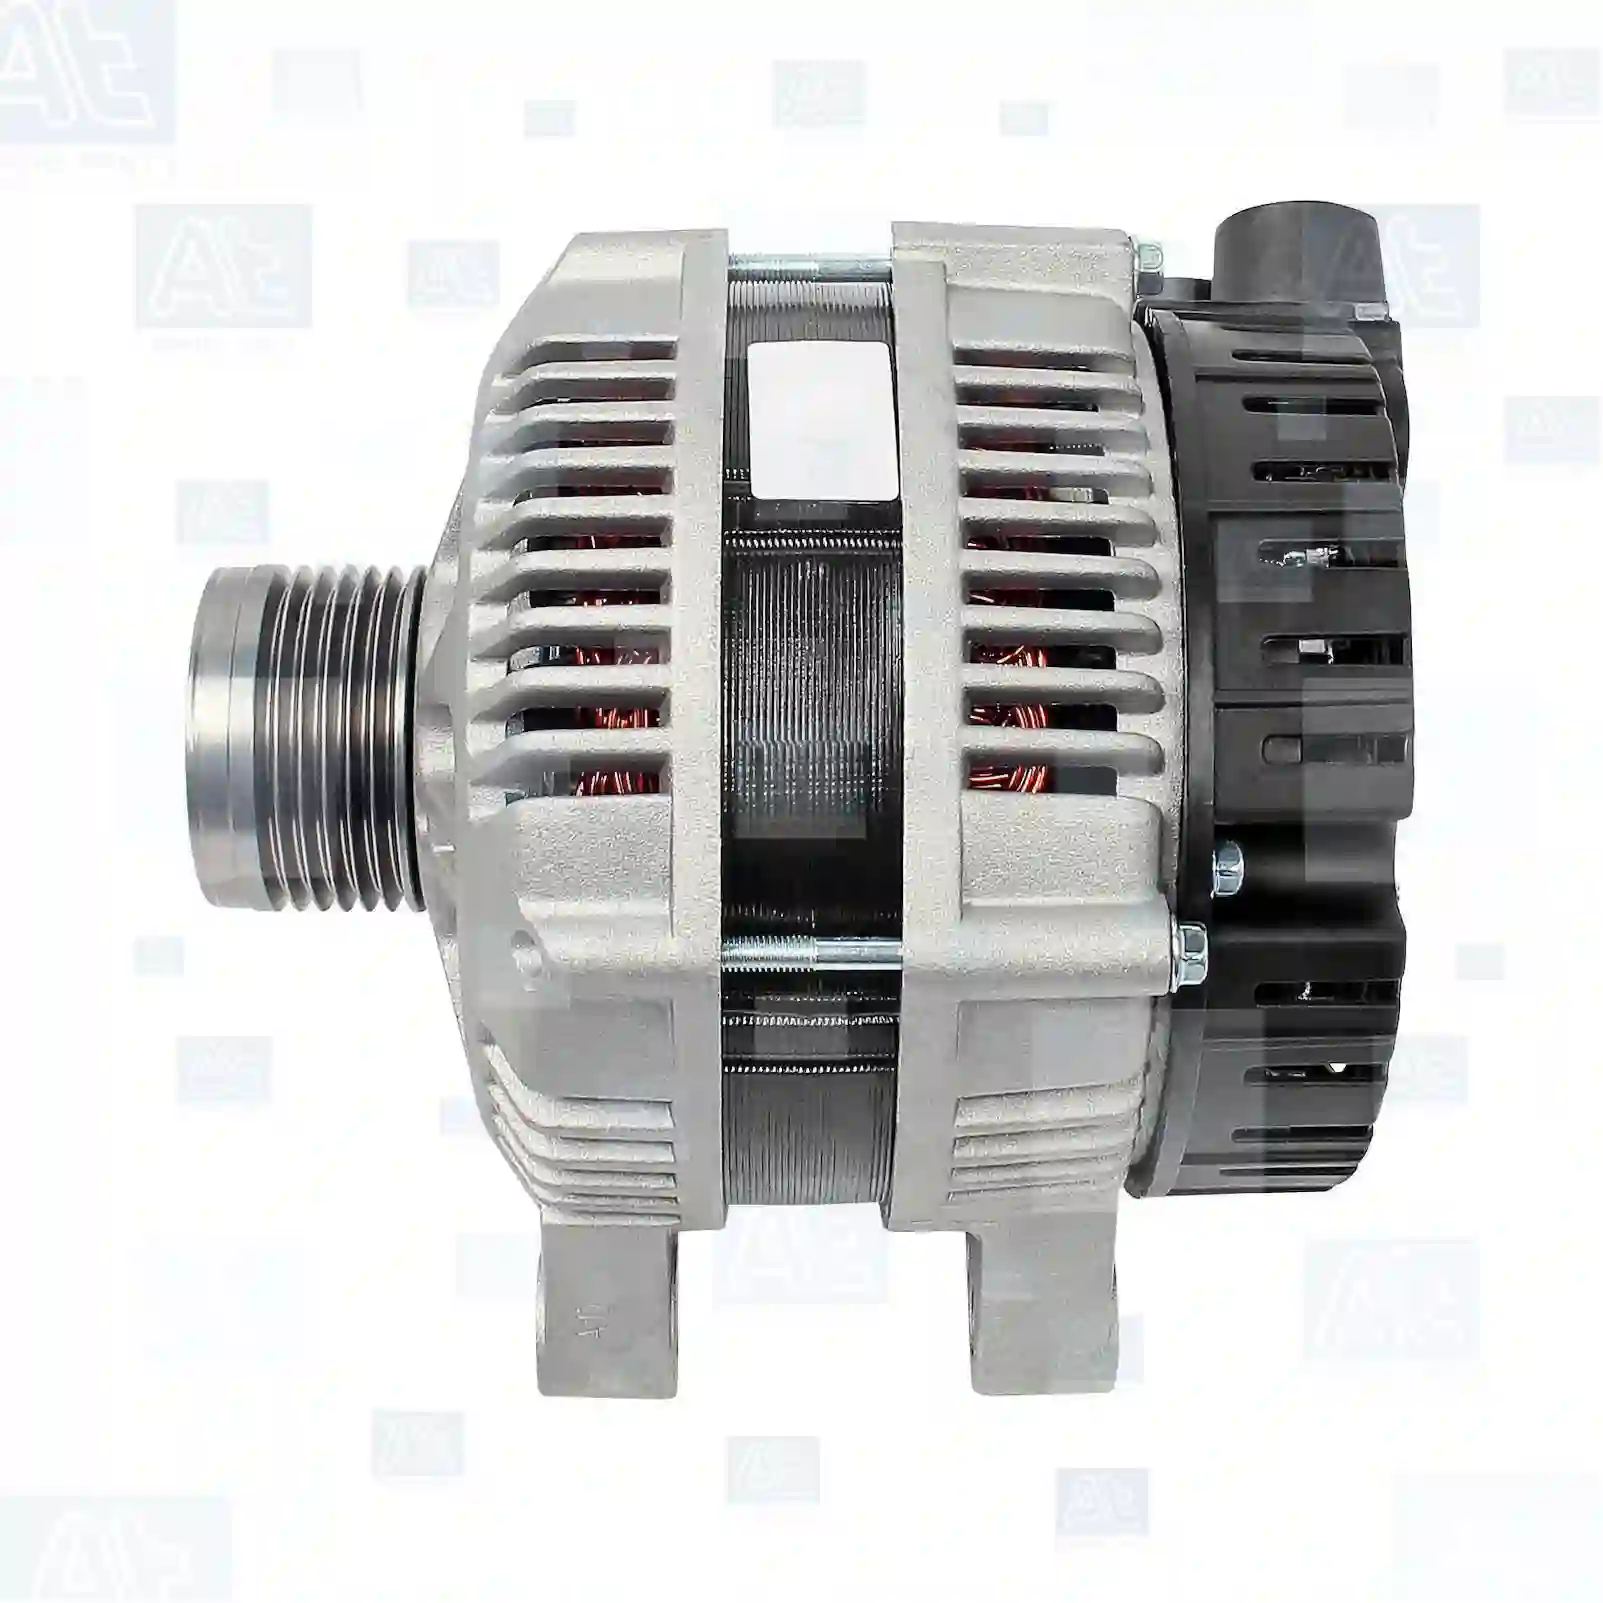 Alternator, at no 77710105, oem no: 5702A0, 5702A1, 57054S, 5705A1, 5705AA, 5705CL, 5705ER, 9467560380, 9636254180, 9640878780, 9641302580, 9645907580, 9655531380, 71723407, 71723408, 71723429, 71780165, 71780169, 9467560380, 9640878780, 9645907580, 9645907680, 9640878780, 5702A0, 5702A1, 57054S, 5705A1, 5705AA, 5705CL, 5705ER, 9467560380, 9636254180, 9640878780, 9641302580, 9645907580, 9655531380, 31400-68D00, 31400-68D01, 31400-68D02, 31400-68D02-000, 31400-68D02-LCP At Spare Part | Engine, Accelerator Pedal, Camshaft, Connecting Rod, Crankcase, Crankshaft, Cylinder Head, Engine Suspension Mountings, Exhaust Manifold, Exhaust Gas Recirculation, Filter Kits, Flywheel Housing, General Overhaul Kits, Engine, Intake Manifold, Oil Cleaner, Oil Cooler, Oil Filter, Oil Pump, Oil Sump, Piston & Liner, Sensor & Switch, Timing Case, Turbocharger, Cooling System, Belt Tensioner, Coolant Filter, Coolant Pipe, Corrosion Prevention Agent, Drive, Expansion Tank, Fan, Intercooler, Monitors & Gauges, Radiator, Thermostat, V-Belt / Timing belt, Water Pump, Fuel System, Electronical Injector Unit, Feed Pump, Fuel Filter, cpl., Fuel Gauge Sender,  Fuel Line, Fuel Pump, Fuel Tank, Injection Line Kit, Injection Pump, Exhaust System, Clutch & Pedal, Gearbox, Propeller Shaft, Axles, Brake System, Hubs & Wheels, Suspension, Leaf Spring, Universal Parts / Accessories, Steering, Electrical System, Cabin Alternator, at no 77710105, oem no: 5702A0, 5702A1, 57054S, 5705A1, 5705AA, 5705CL, 5705ER, 9467560380, 9636254180, 9640878780, 9641302580, 9645907580, 9655531380, 71723407, 71723408, 71723429, 71780165, 71780169, 9467560380, 9640878780, 9645907580, 9645907680, 9640878780, 5702A0, 5702A1, 57054S, 5705A1, 5705AA, 5705CL, 5705ER, 9467560380, 9636254180, 9640878780, 9641302580, 9645907580, 9655531380, 31400-68D00, 31400-68D01, 31400-68D02, 31400-68D02-000, 31400-68D02-LCP At Spare Part | Engine, Accelerator Pedal, Camshaft, Connecting Rod, Crankcase, Crankshaft, Cylinder Head, Engine Suspension Mountings, Exhaust Manifold, Exhaust Gas Recirculation, Filter Kits, Flywheel Housing, General Overhaul Kits, Engine, Intake Manifold, Oil Cleaner, Oil Cooler, Oil Filter, Oil Pump, Oil Sump, Piston & Liner, Sensor & Switch, Timing Case, Turbocharger, Cooling System, Belt Tensioner, Coolant Filter, Coolant Pipe, Corrosion Prevention Agent, Drive, Expansion Tank, Fan, Intercooler, Monitors & Gauges, Radiator, Thermostat, V-Belt / Timing belt, Water Pump, Fuel System, Electronical Injector Unit, Feed Pump, Fuel Filter, cpl., Fuel Gauge Sender,  Fuel Line, Fuel Pump, Fuel Tank, Injection Line Kit, Injection Pump, Exhaust System, Clutch & Pedal, Gearbox, Propeller Shaft, Axles, Brake System, Hubs & Wheels, Suspension, Leaf Spring, Universal Parts / Accessories, Steering, Electrical System, Cabin